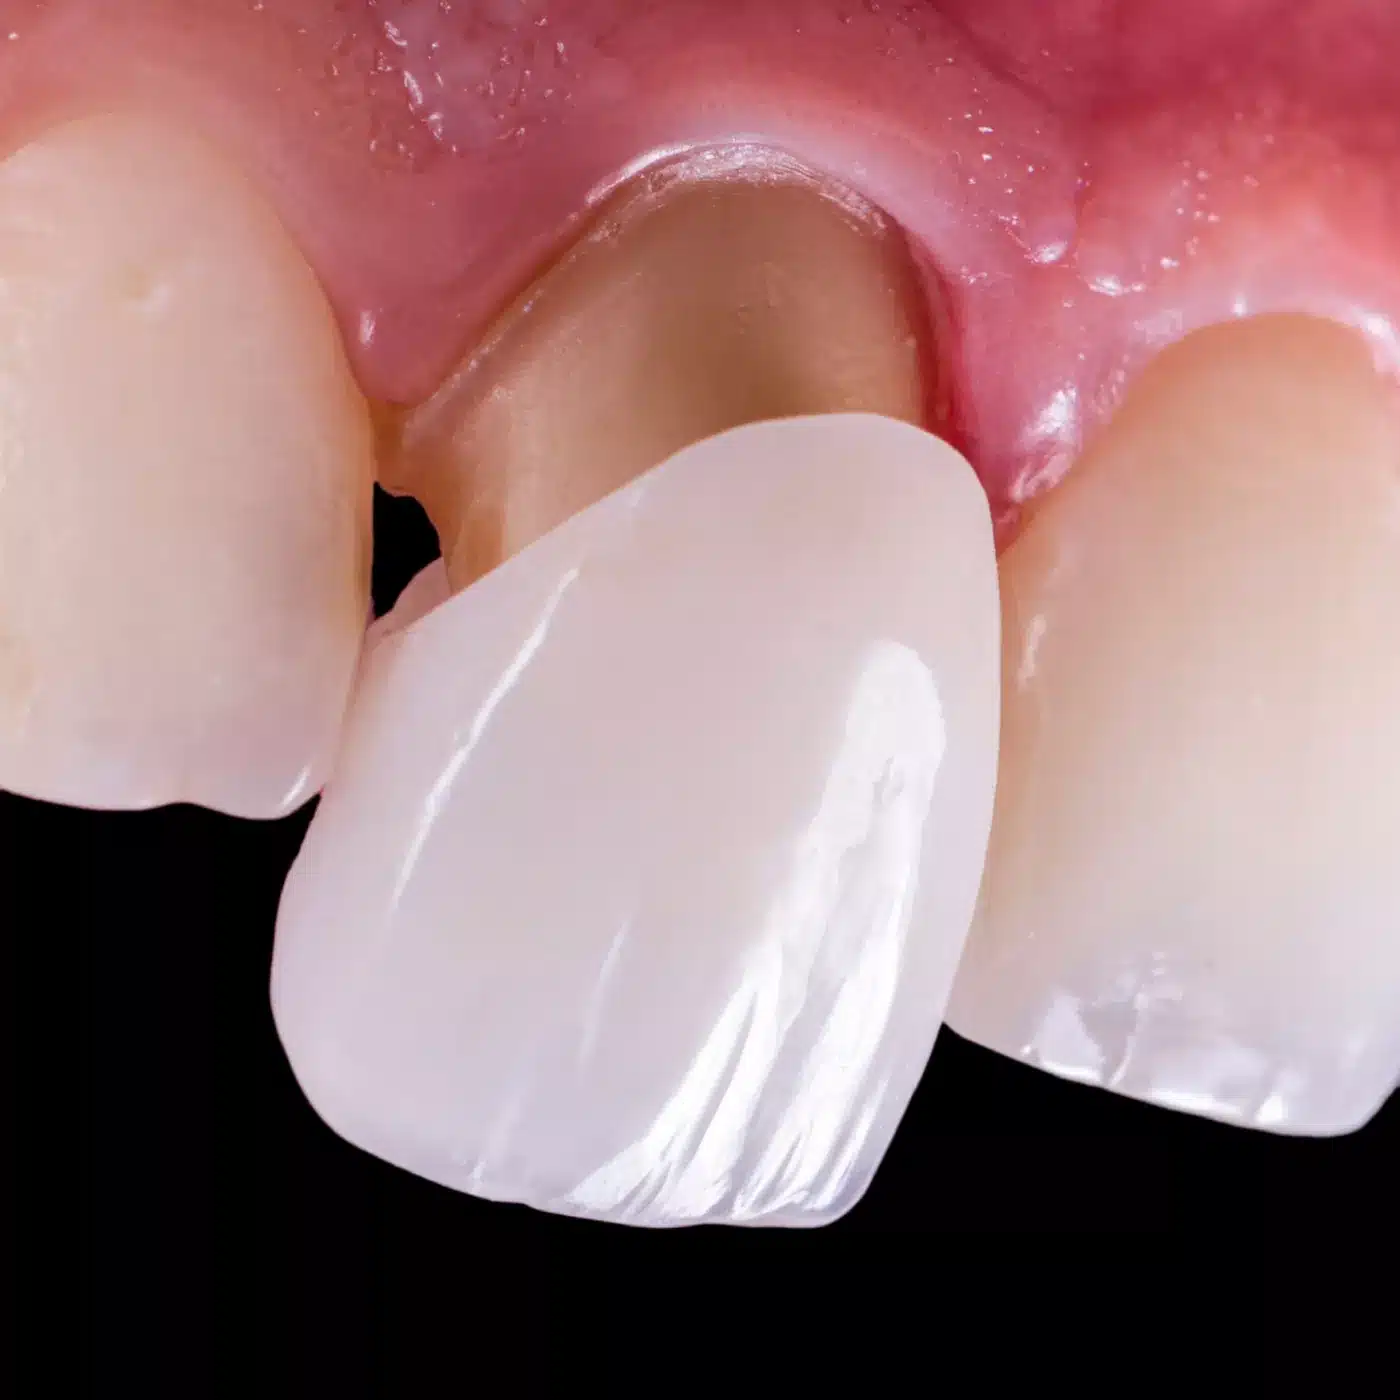 Dental crown over tooth